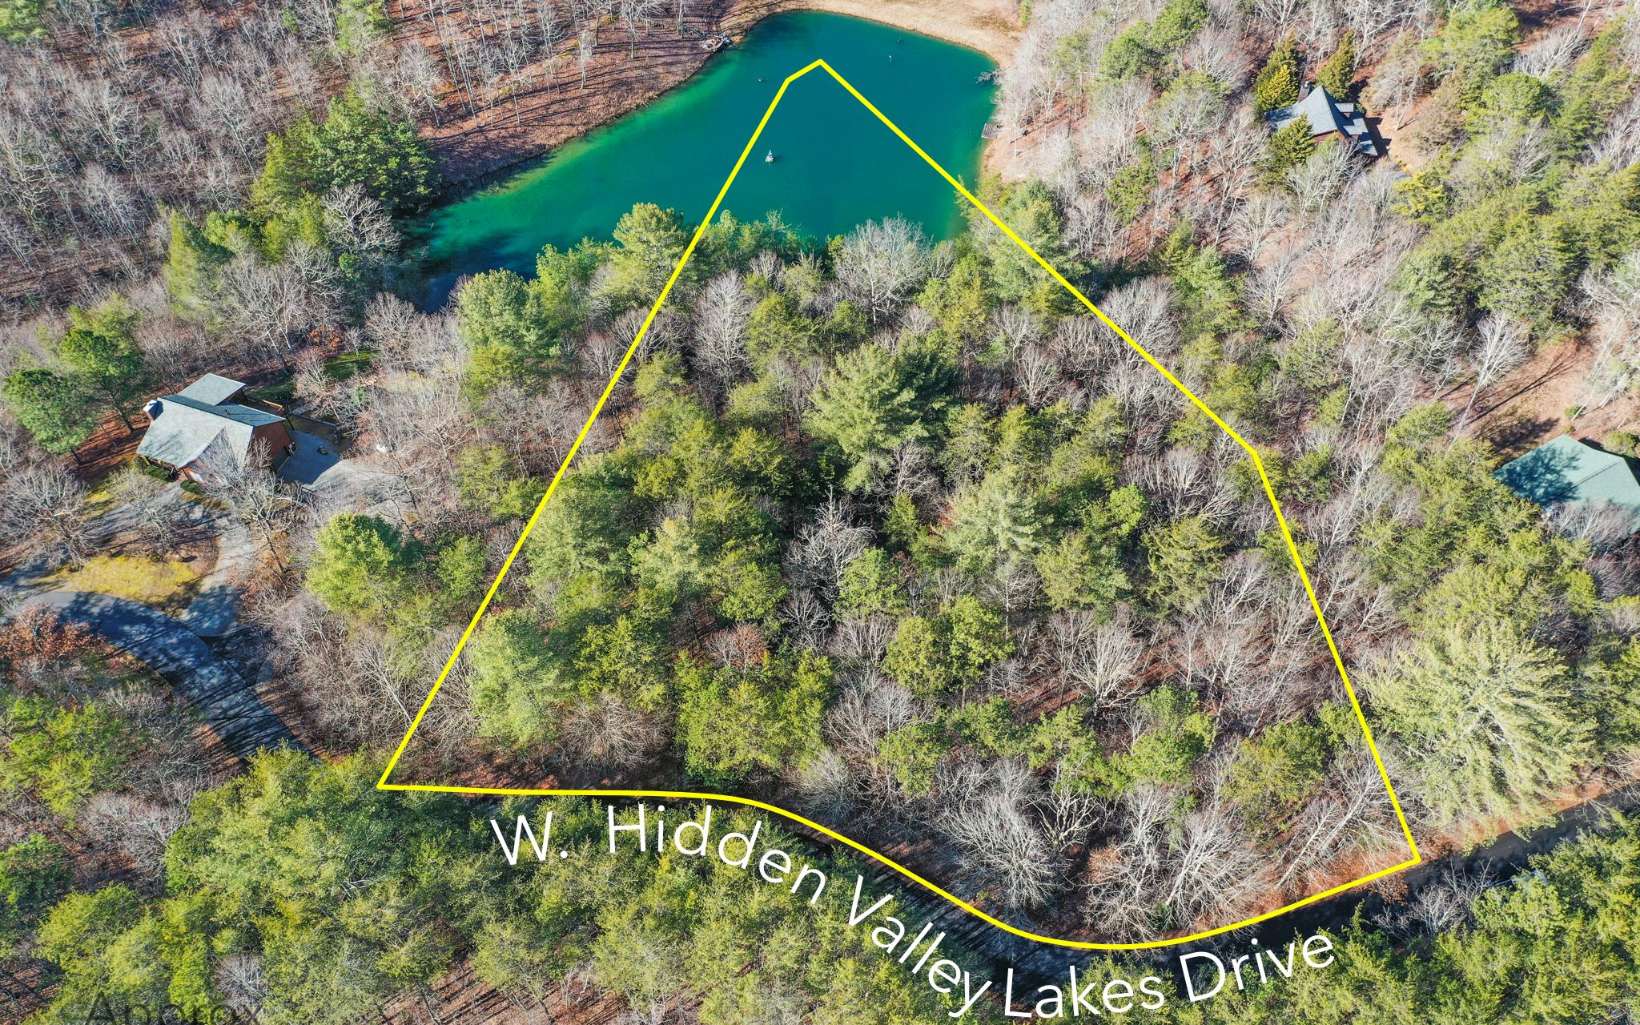 PRIVATE GATED COMMUNITY WITH LAKE FRONTAGE... 185 pristine ac S/D with 4 lakes. All paved access city water available, underground utilities and mtn views in private forestry setting! Gentle laying 2.51 ac lot w/ generous lake frontage. The possibilities are endless w/ this lot. No 4x4 needed, under 5 miles to downtown McCaysville and secure neighborhood!